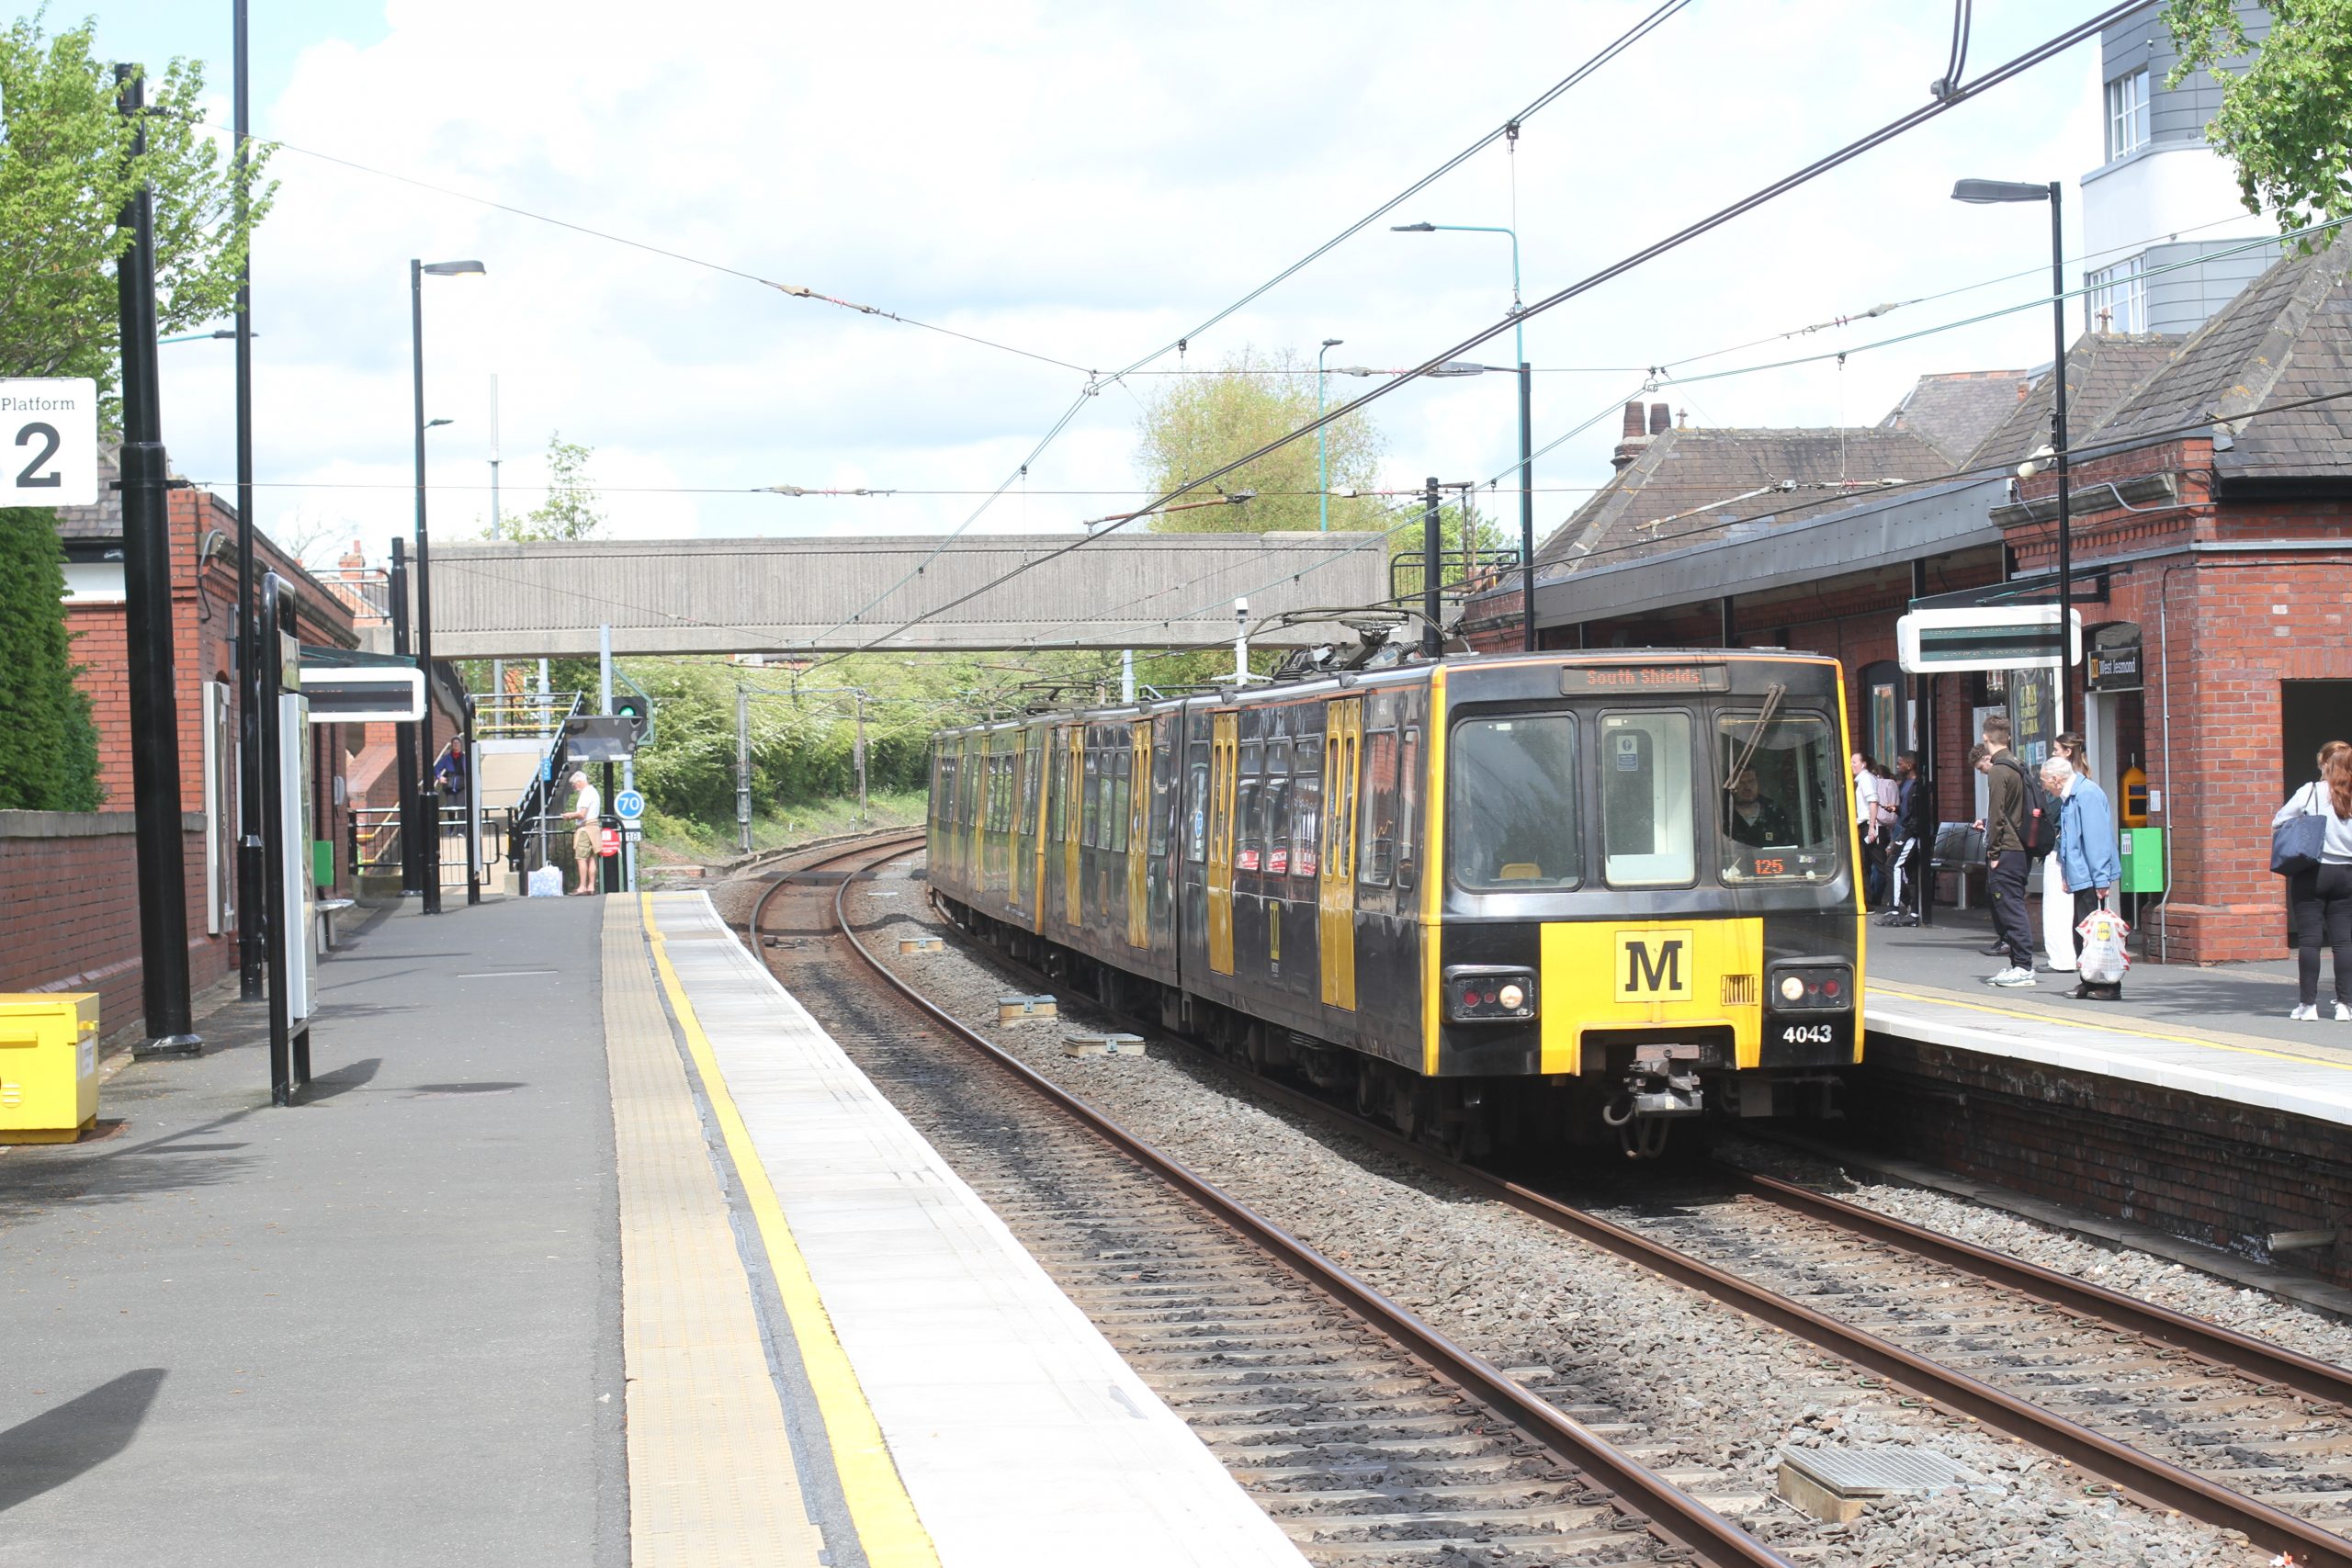 Tyne & Wear metro cars 4043 & 4005 arriving at West Jesmond with a working for South Shields : Image credit - Alan Turton